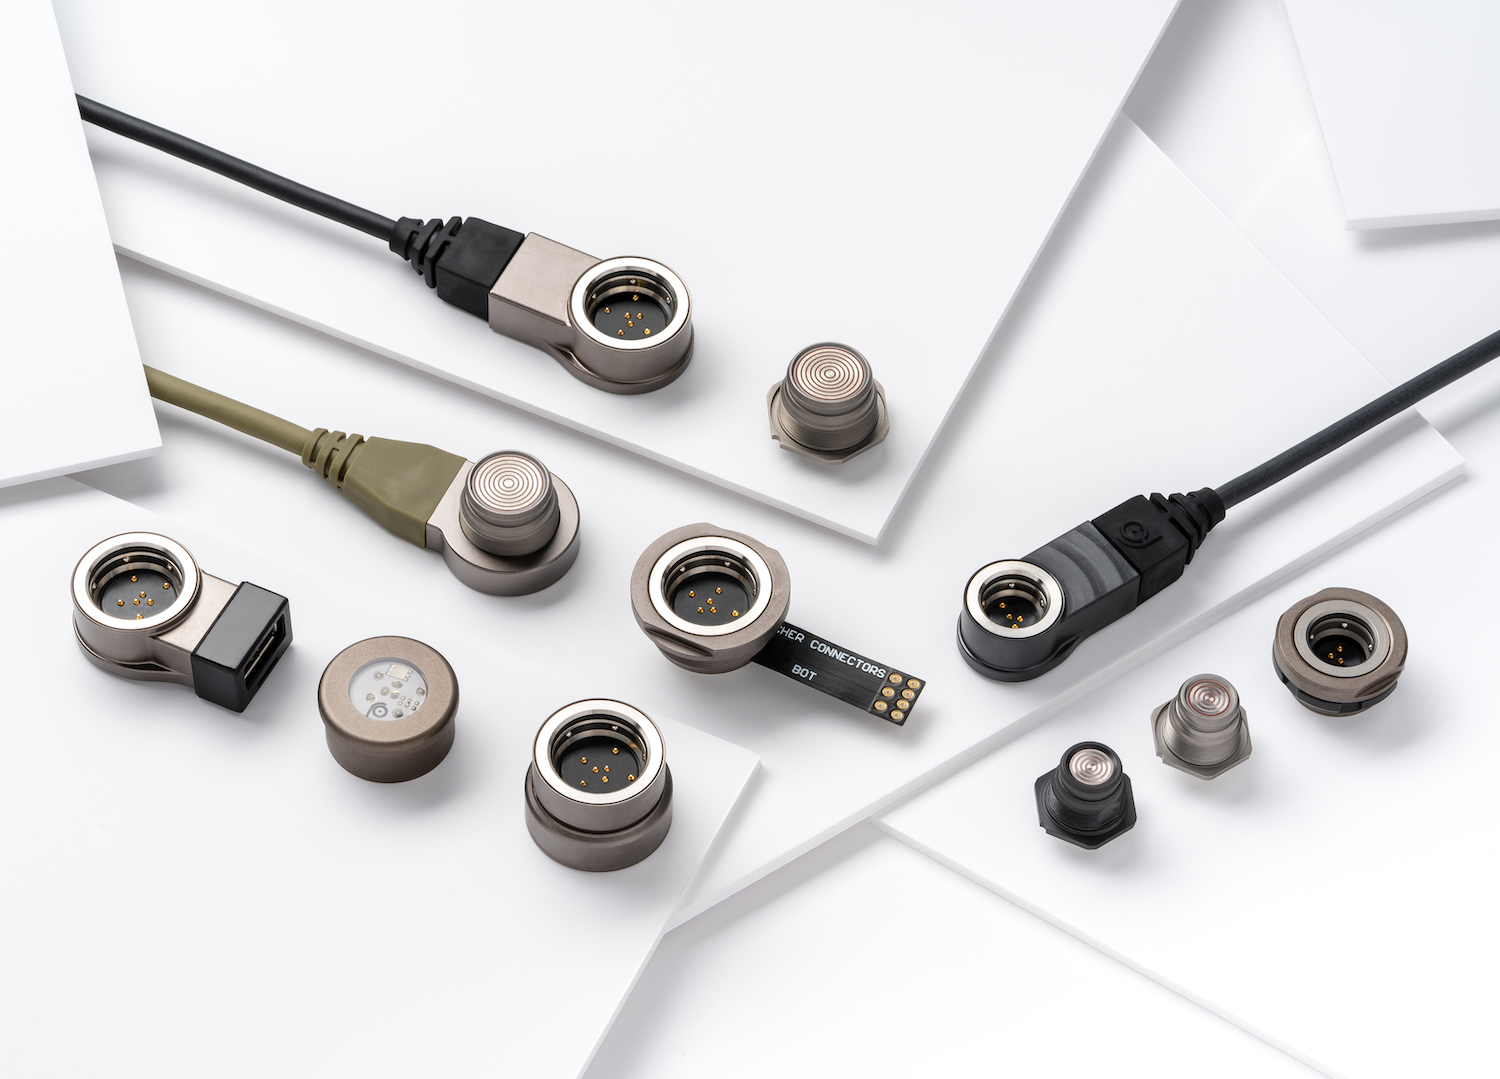 September 24, 2019 Connector Industry News - Kensington Electronics is now stocking the newly expanded Fischer Freedom Series